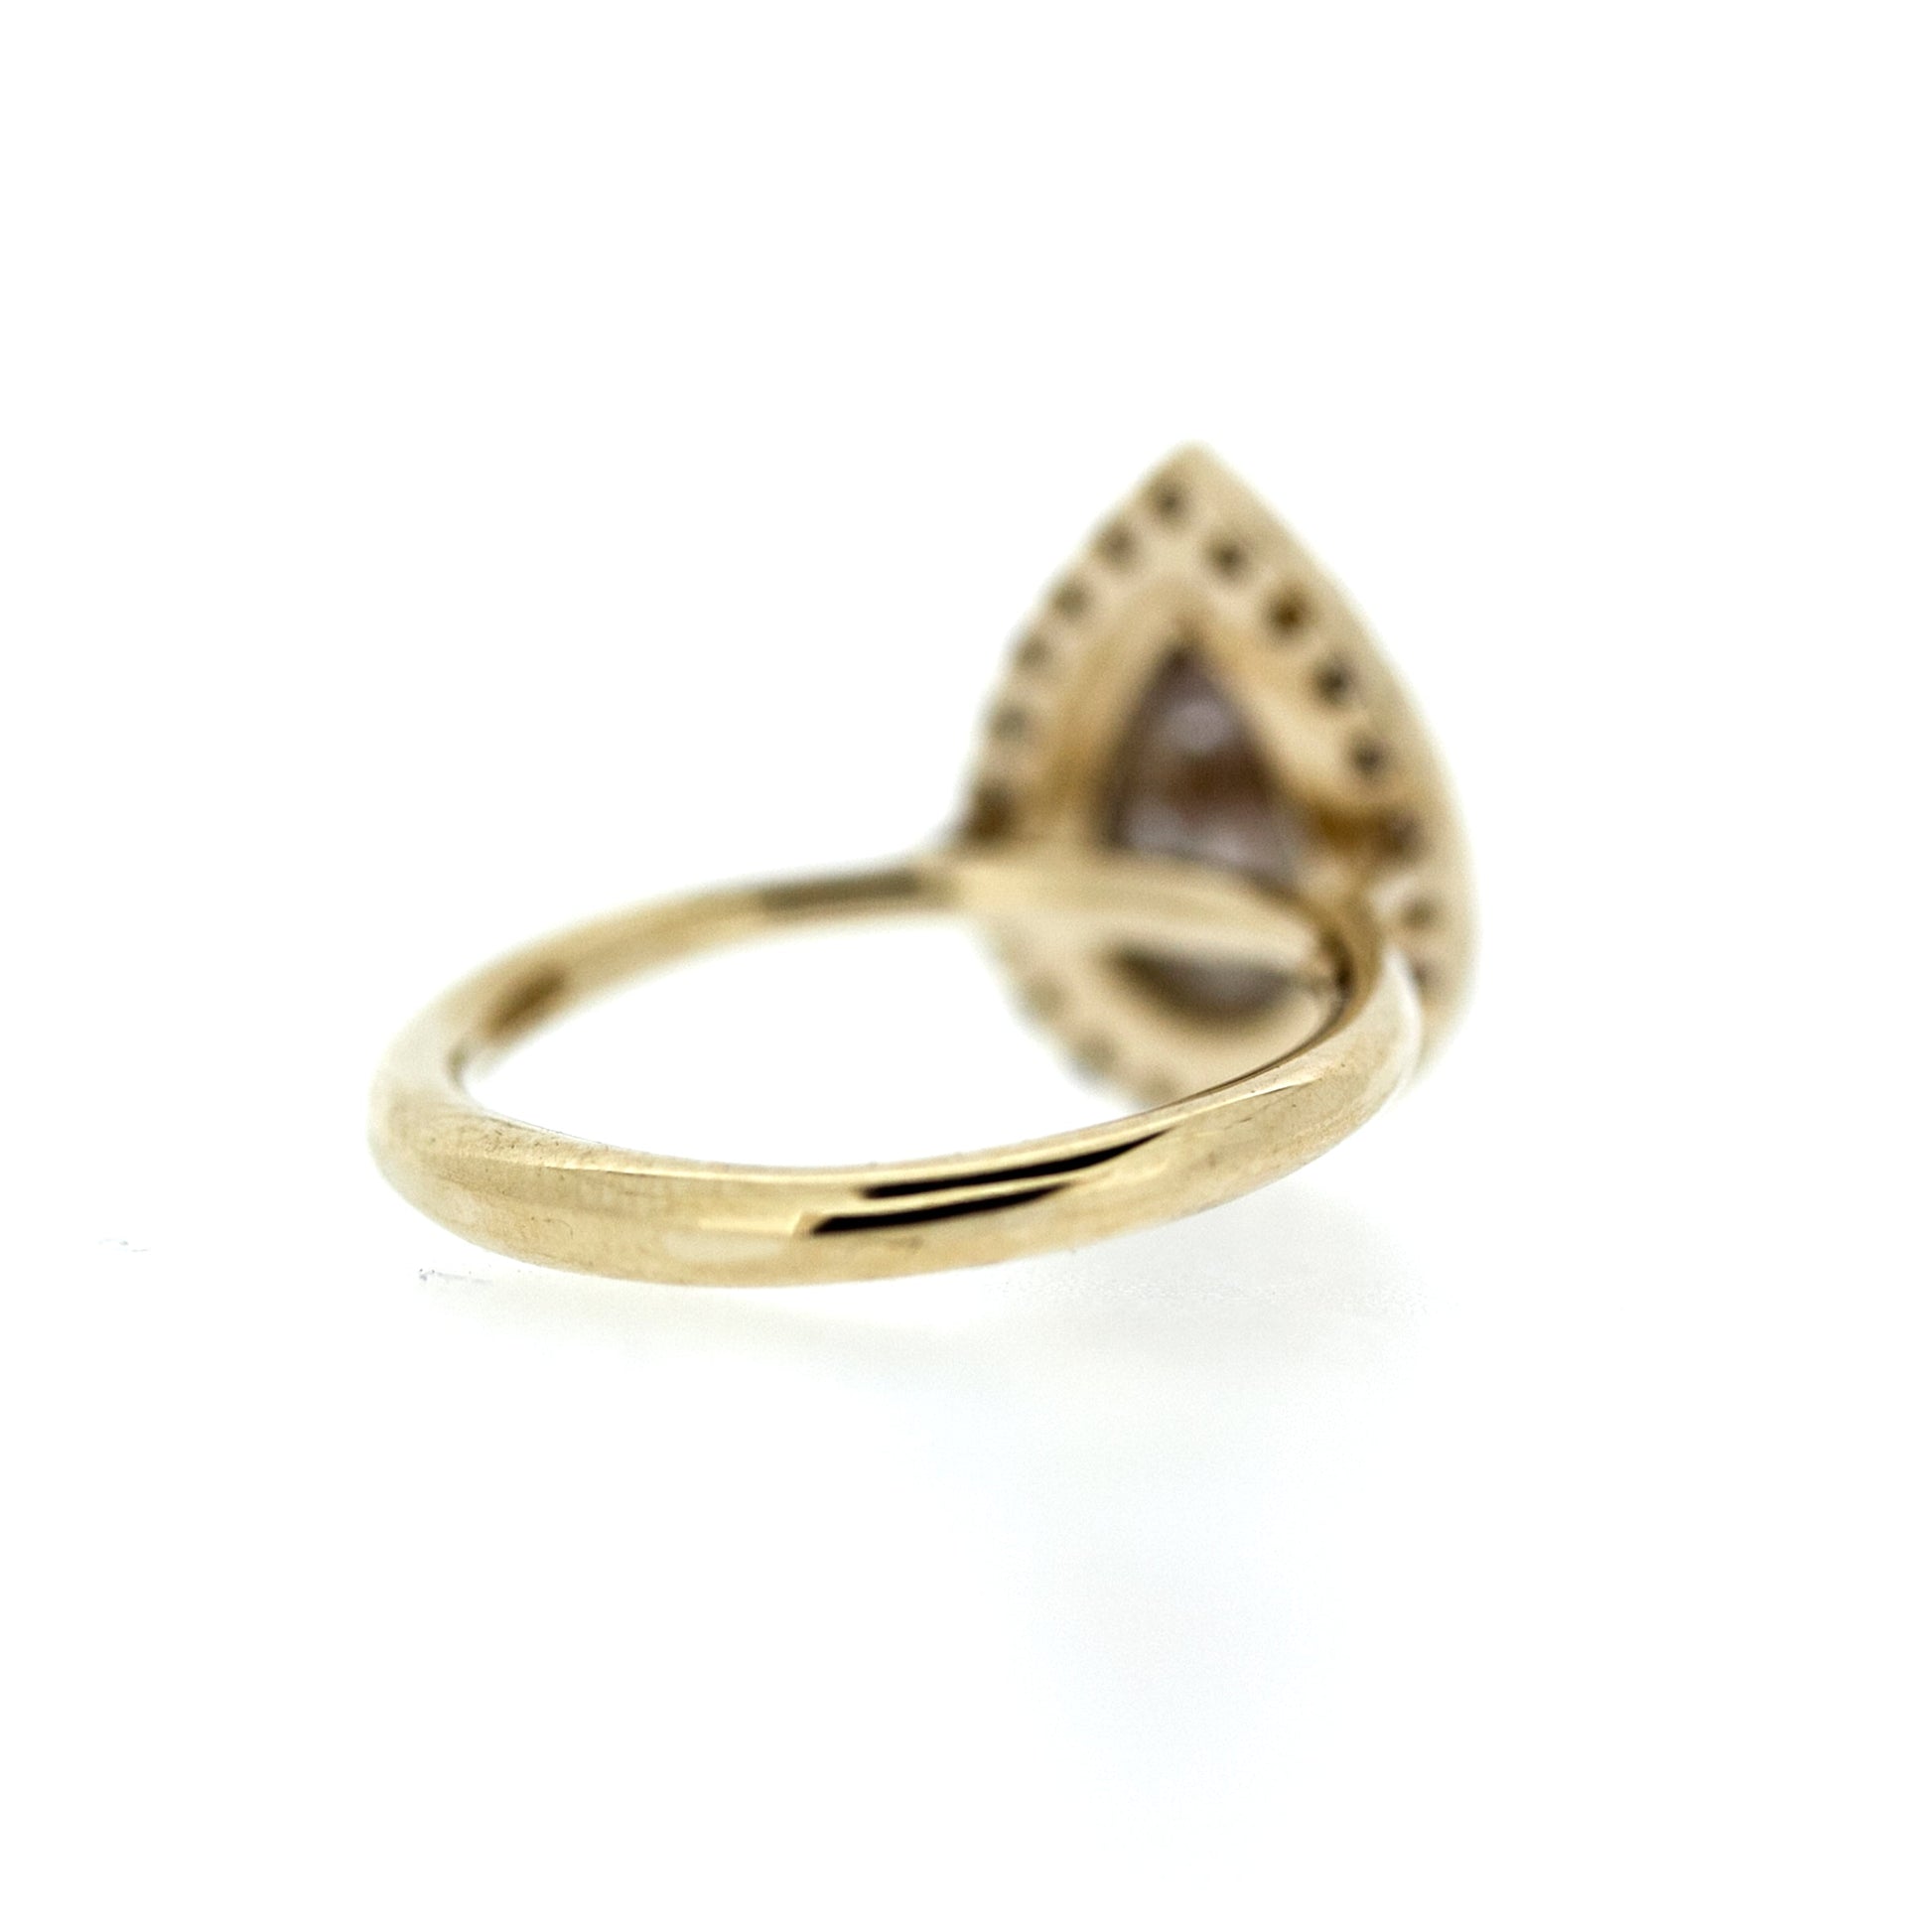 Back view of Ana Ring - Rustic Diamond.